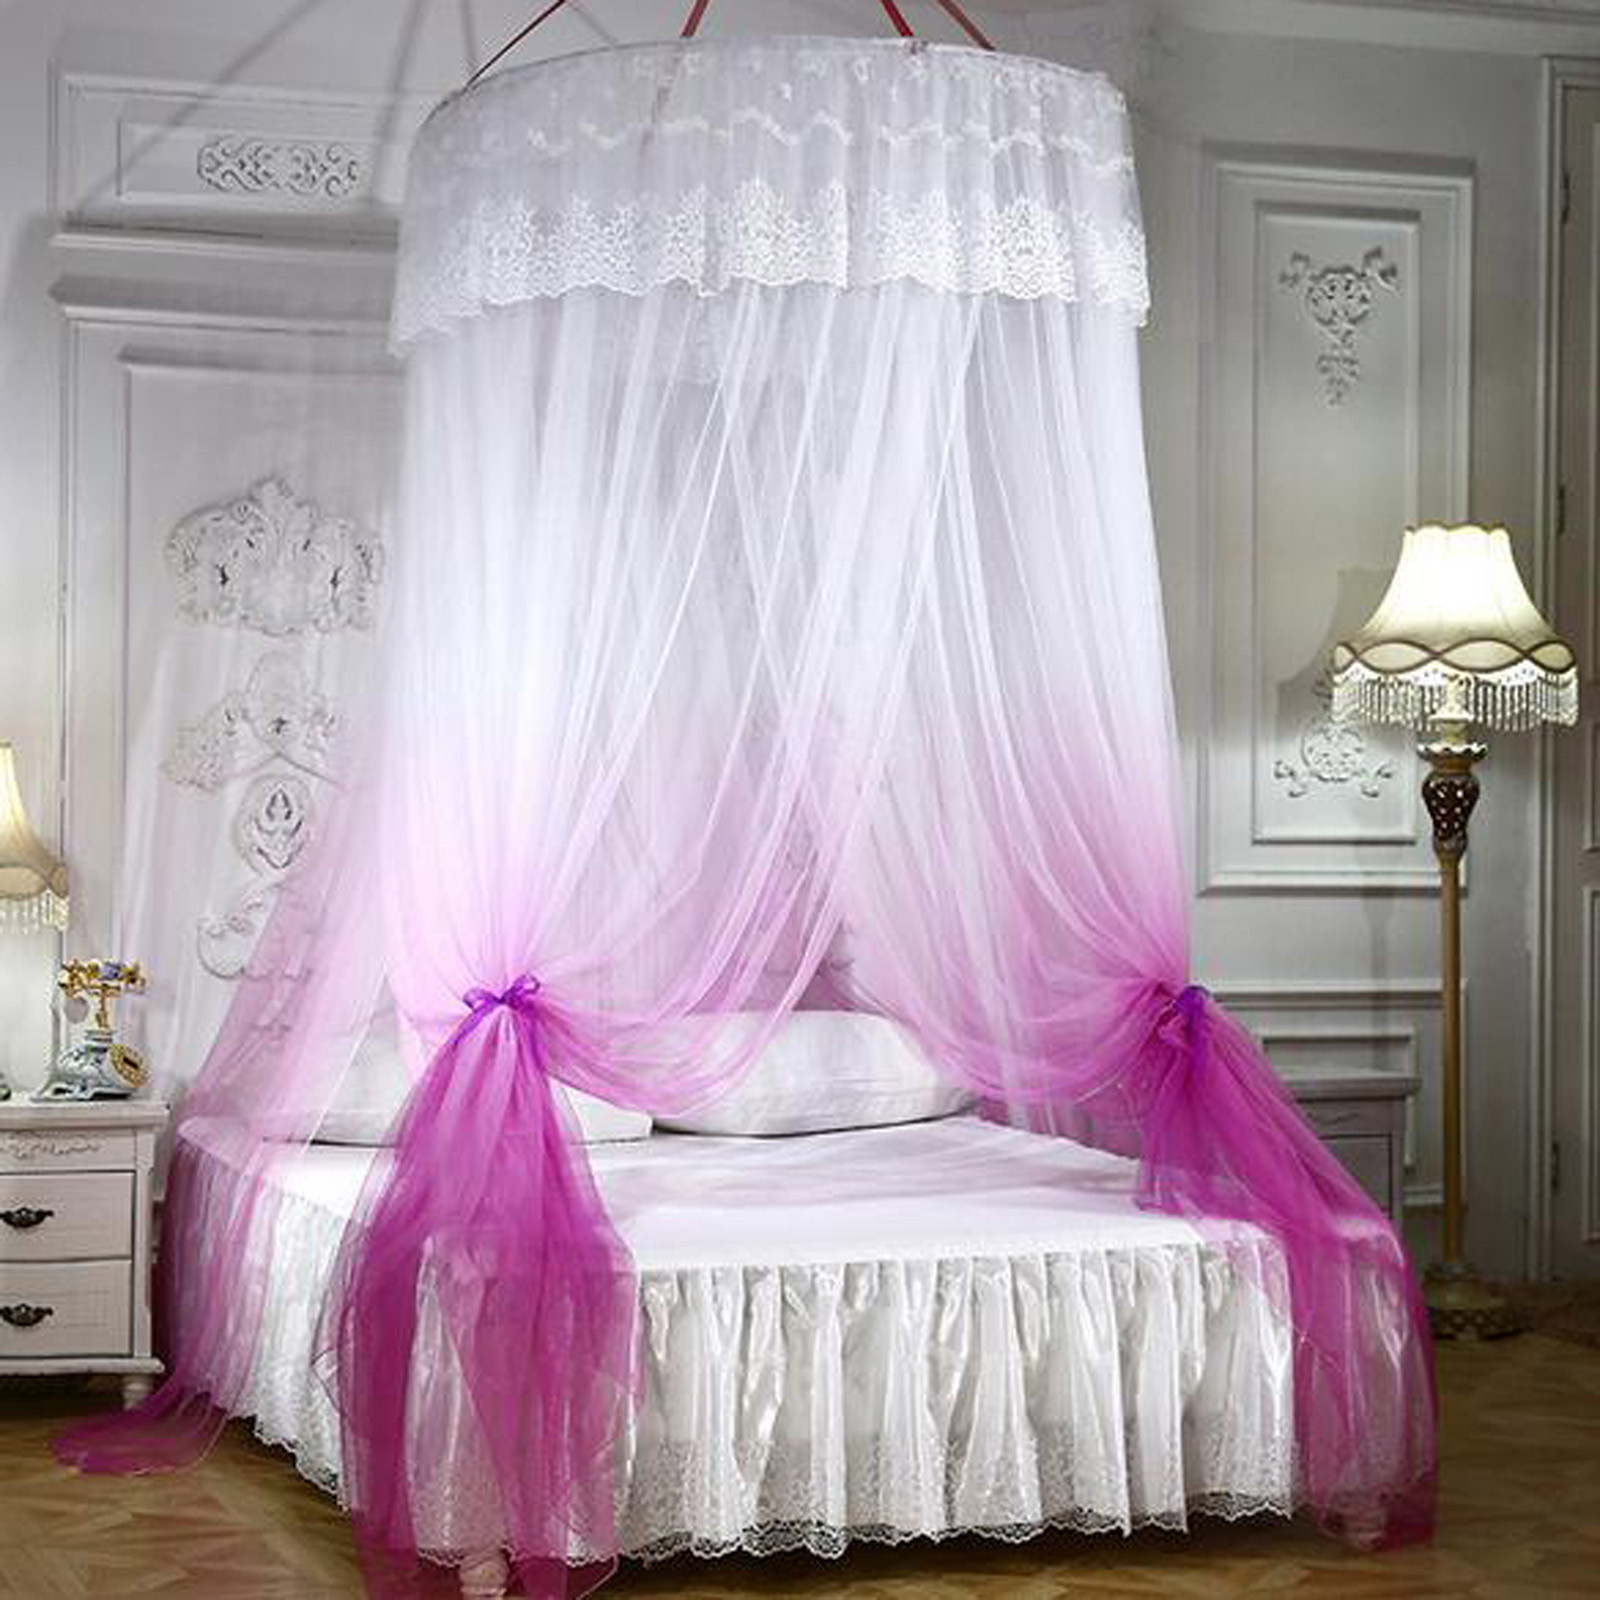 Large romantic color gradient dome mosquito curtains princess Dome mosquito net Home Dome Foldable Bed Canopy with Hook#T2